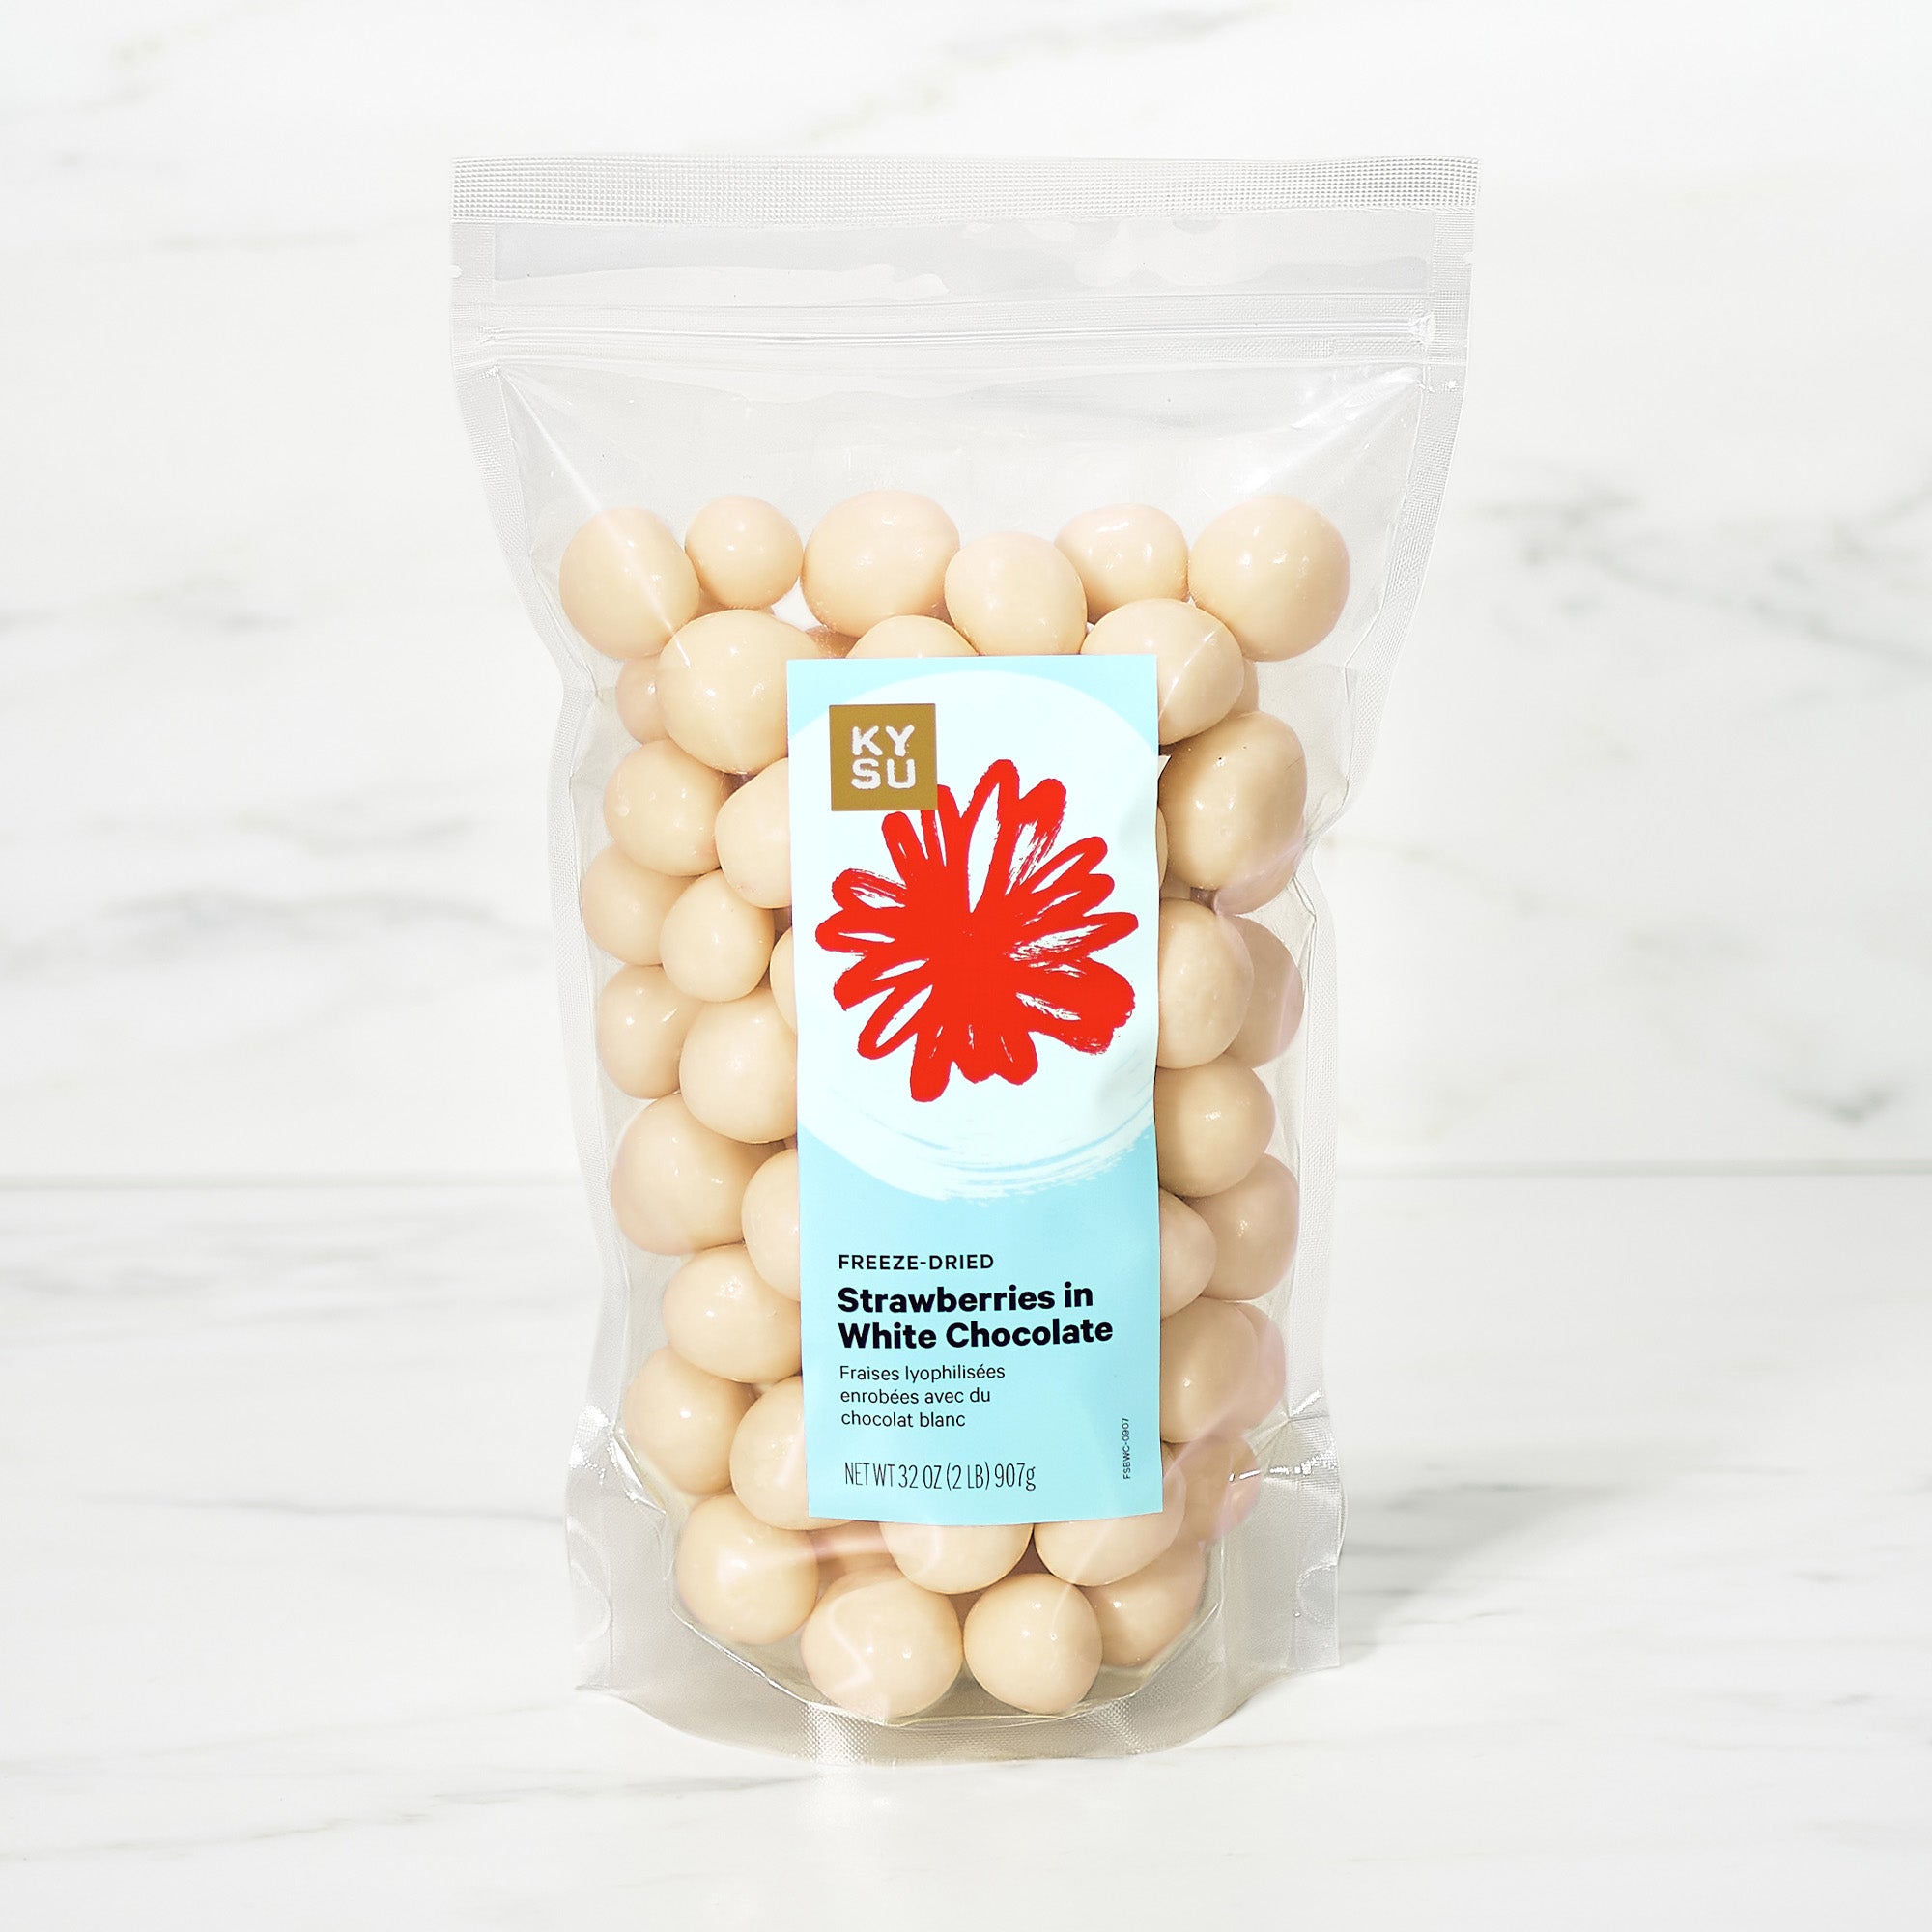 Freeze-dried strawberries in white chocolate, 2.2 lb